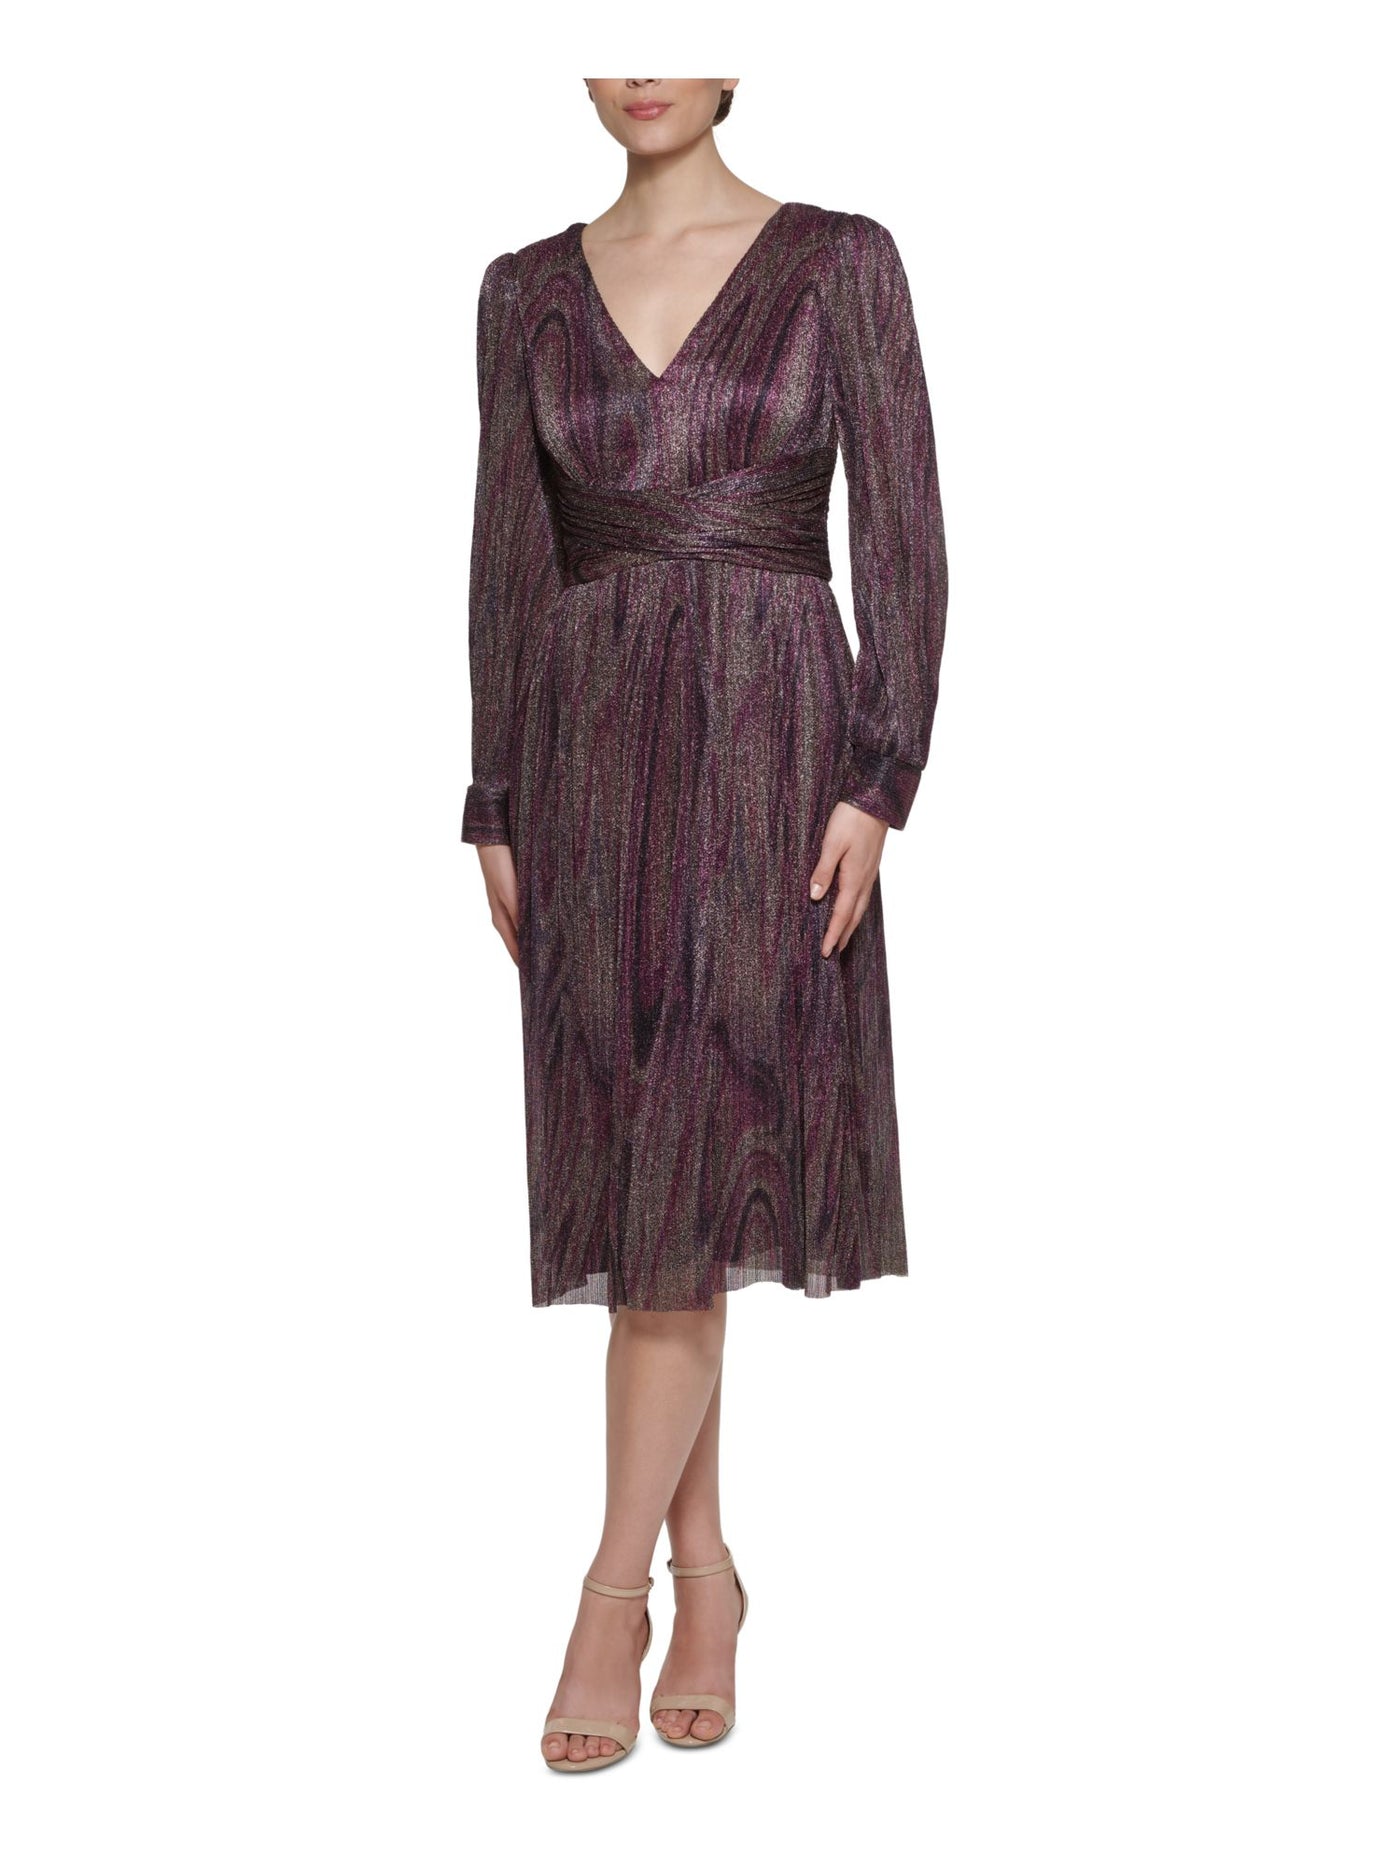 JESSICA HOWARD Womens Purple Metallic Zippered Ruched Lined Long Sleeve V Neck Below The Knee Evening Shift Dress 16